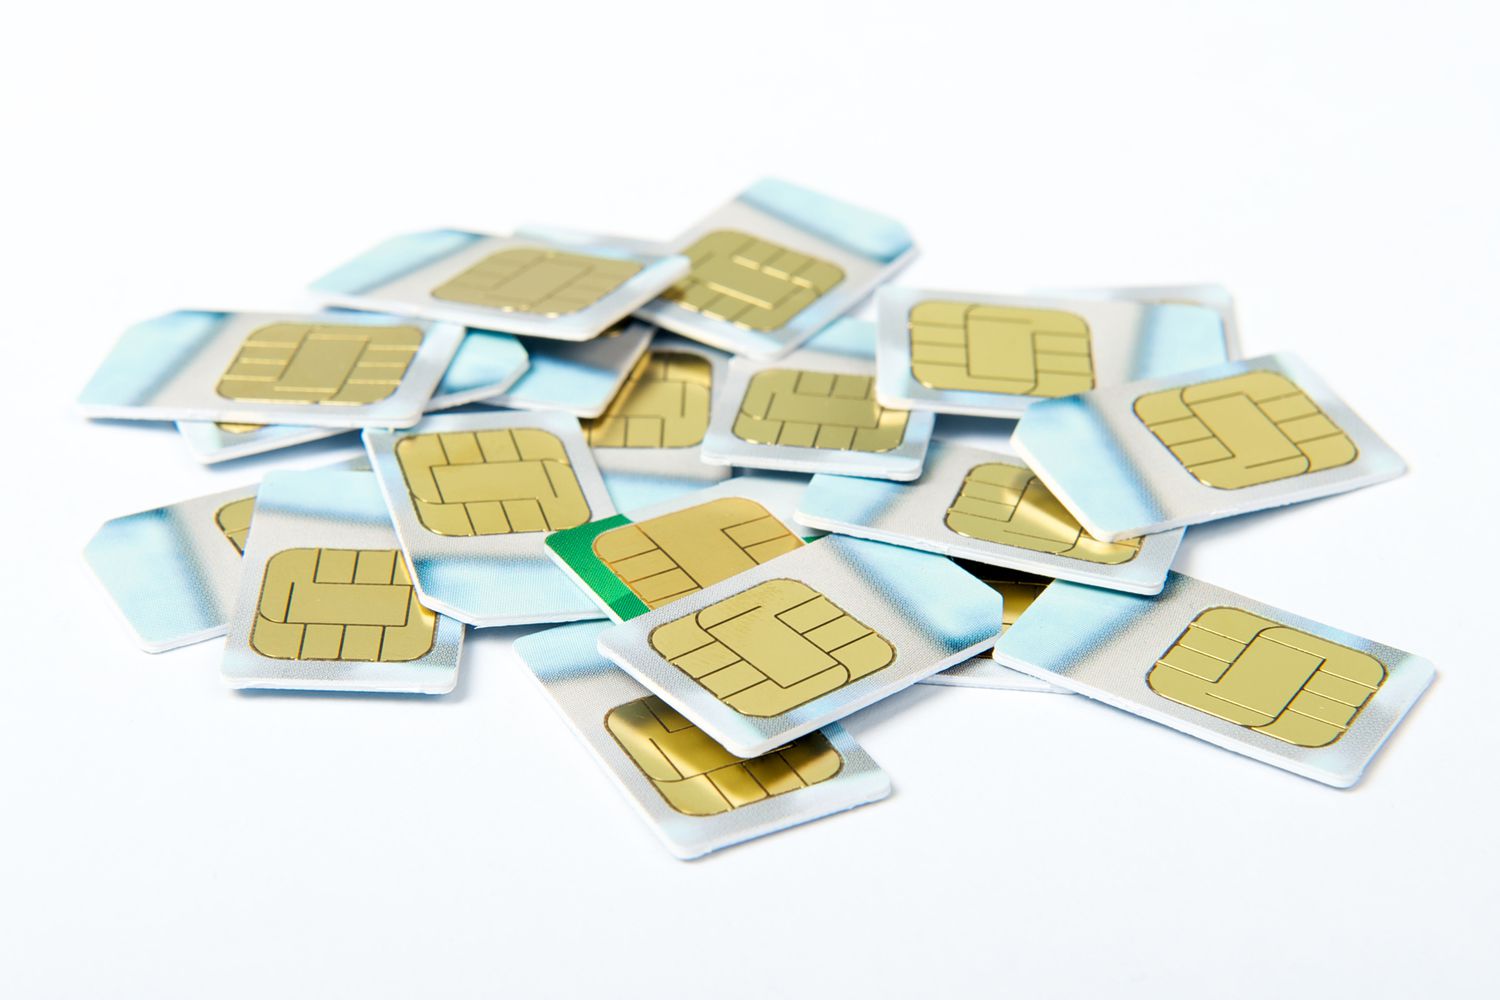 Inserting SIM Card In IPhone 8: A Step-by-Step Guide